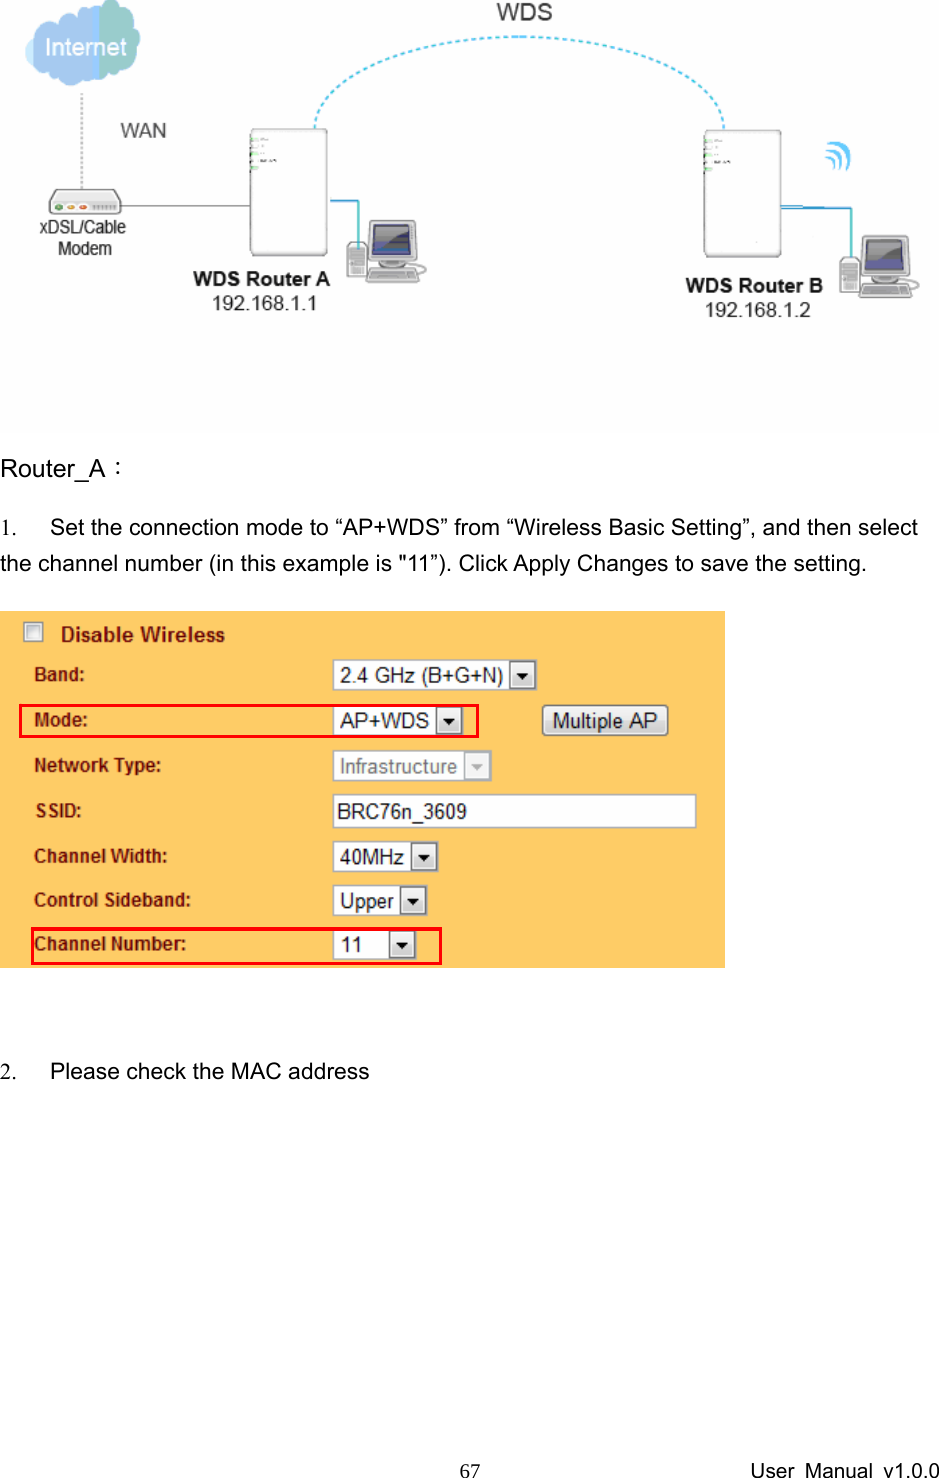                 User Manual v1.0.0 67 Router_A： 1.  Set the connection mode to “AP+WDS” from “Wireless Basic Setting”, and then select the channel number (in this example is &quot;11”). Click Apply Changes to save the setting.   2.  Please check the MAC address 